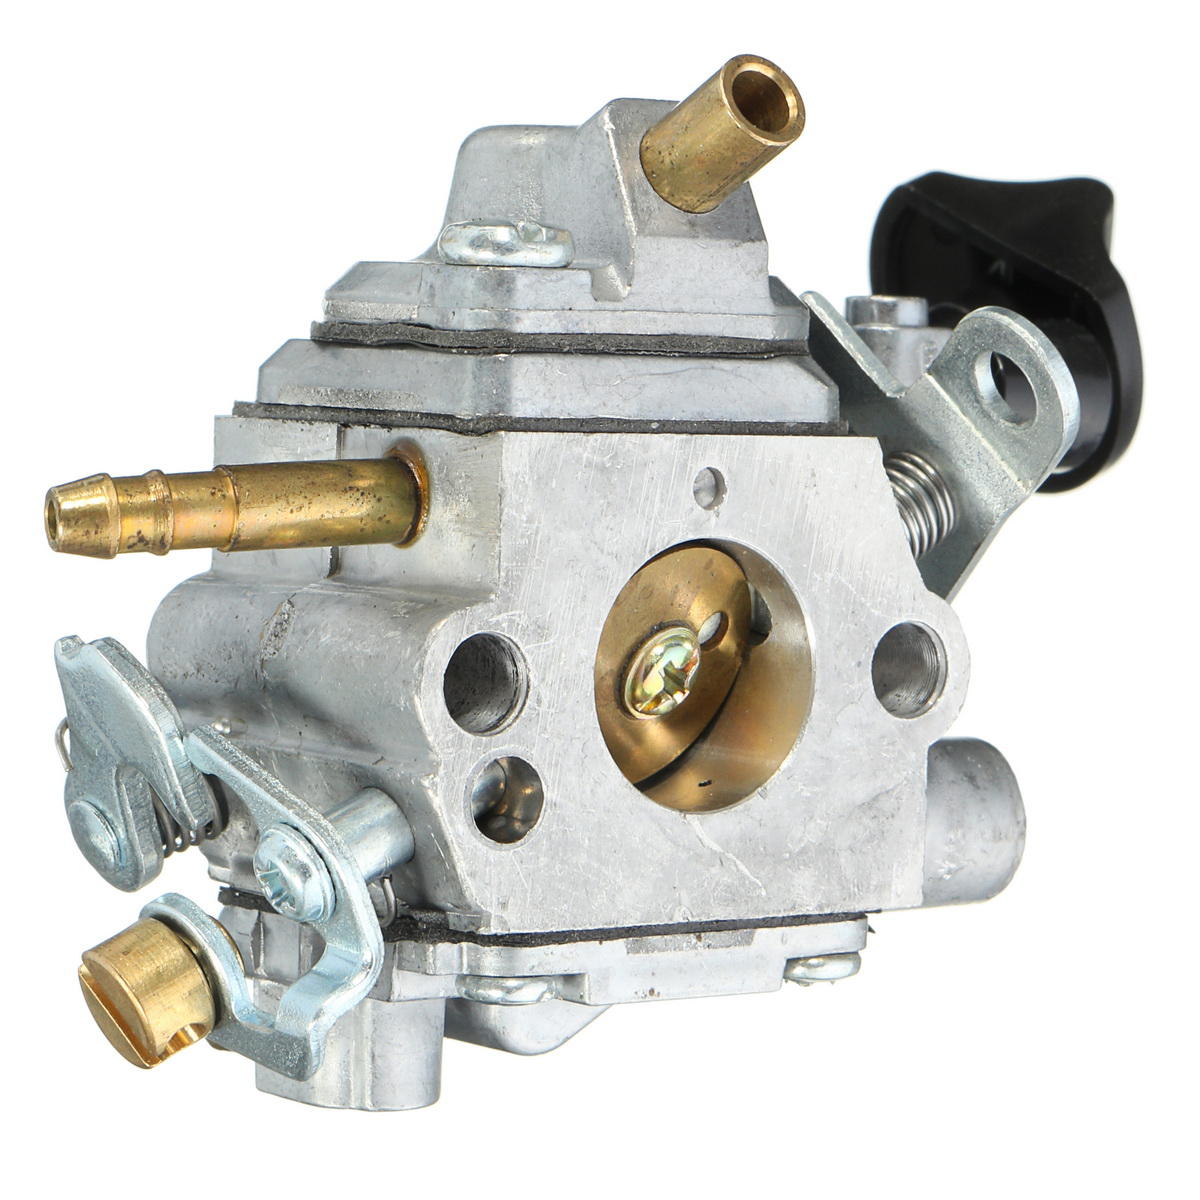 Carburetor For Stihl BR500 BR550 BR600 Backpack Blower Zama C1Q-S183 Carb, Banggood  - buy with discount